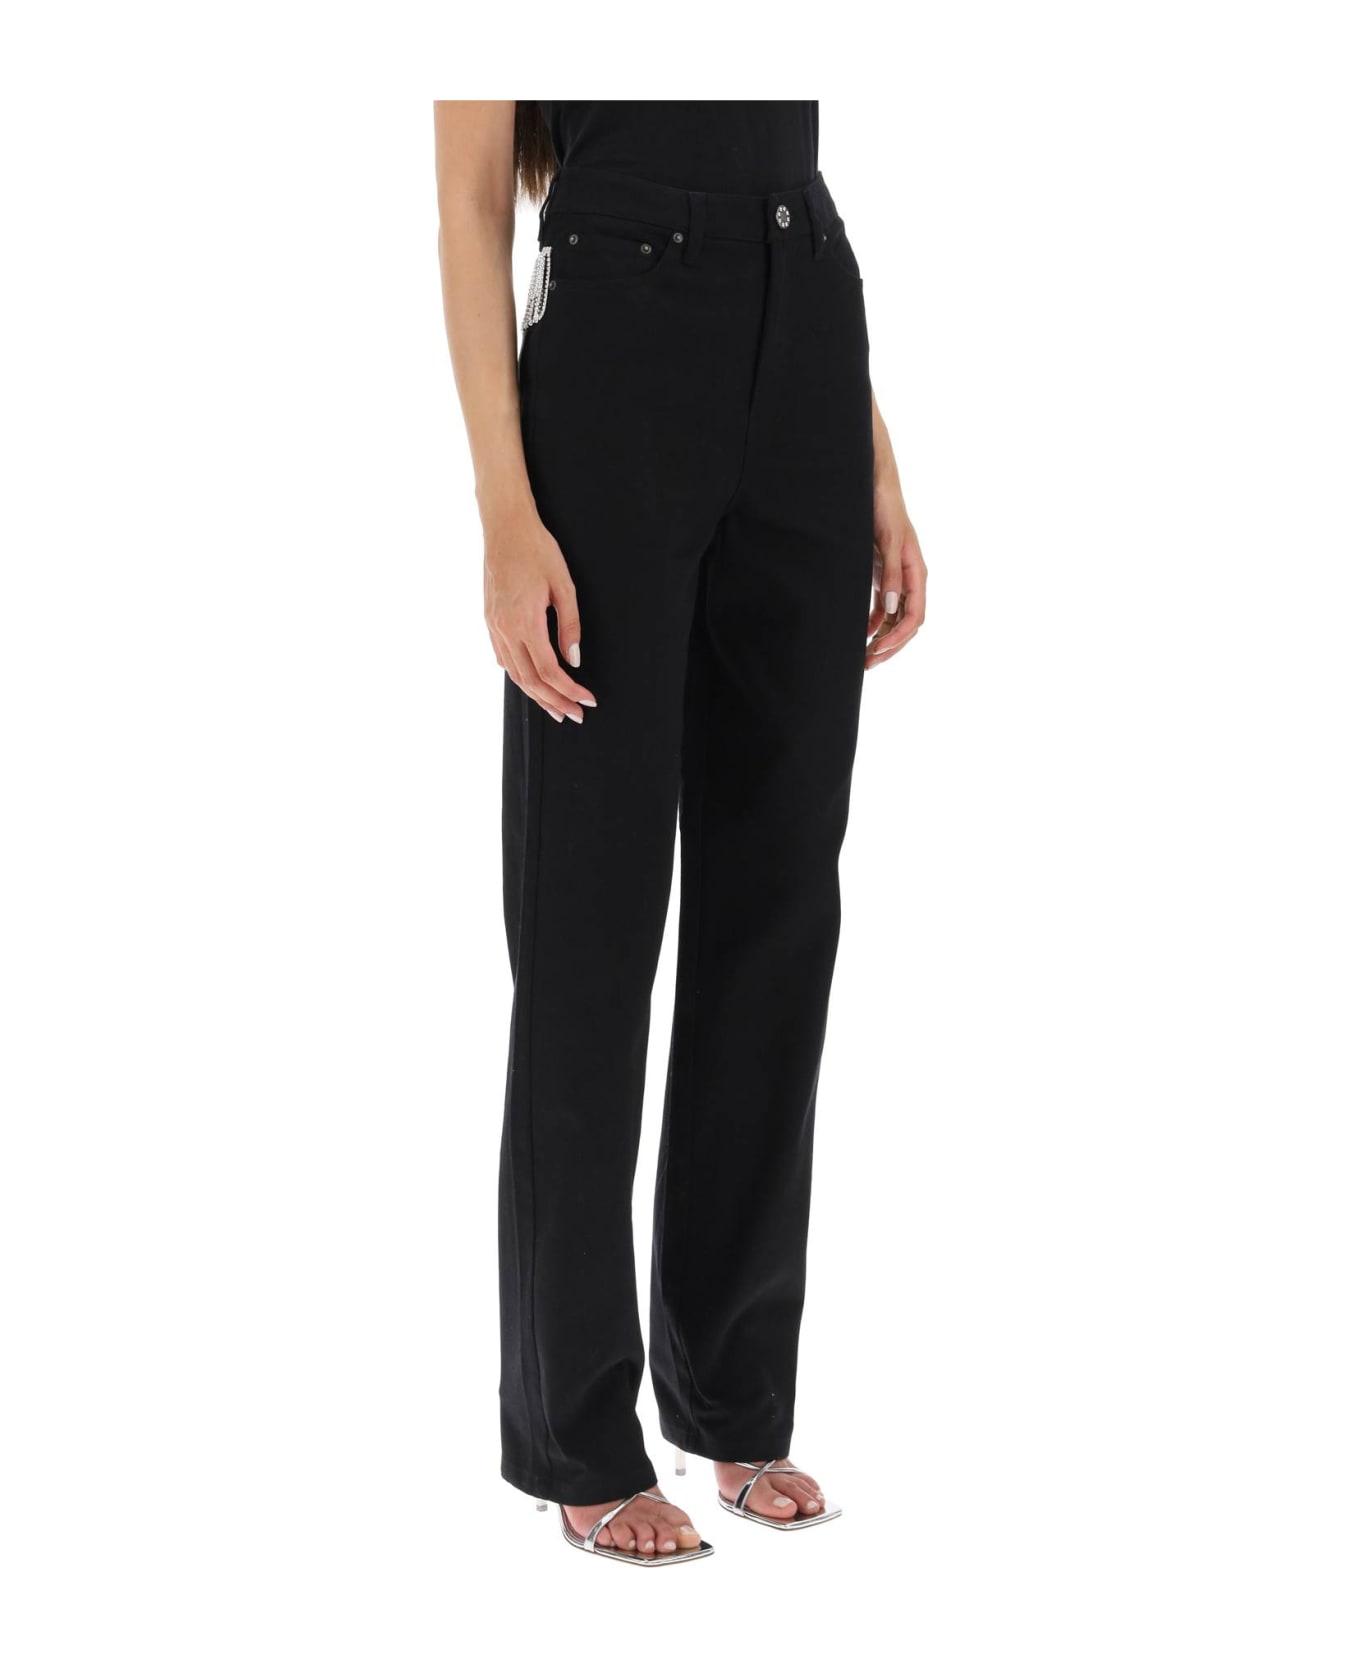 Rotate by Birger Christensen Straight Jeans With Cristal Fringes - BLACK (Black)